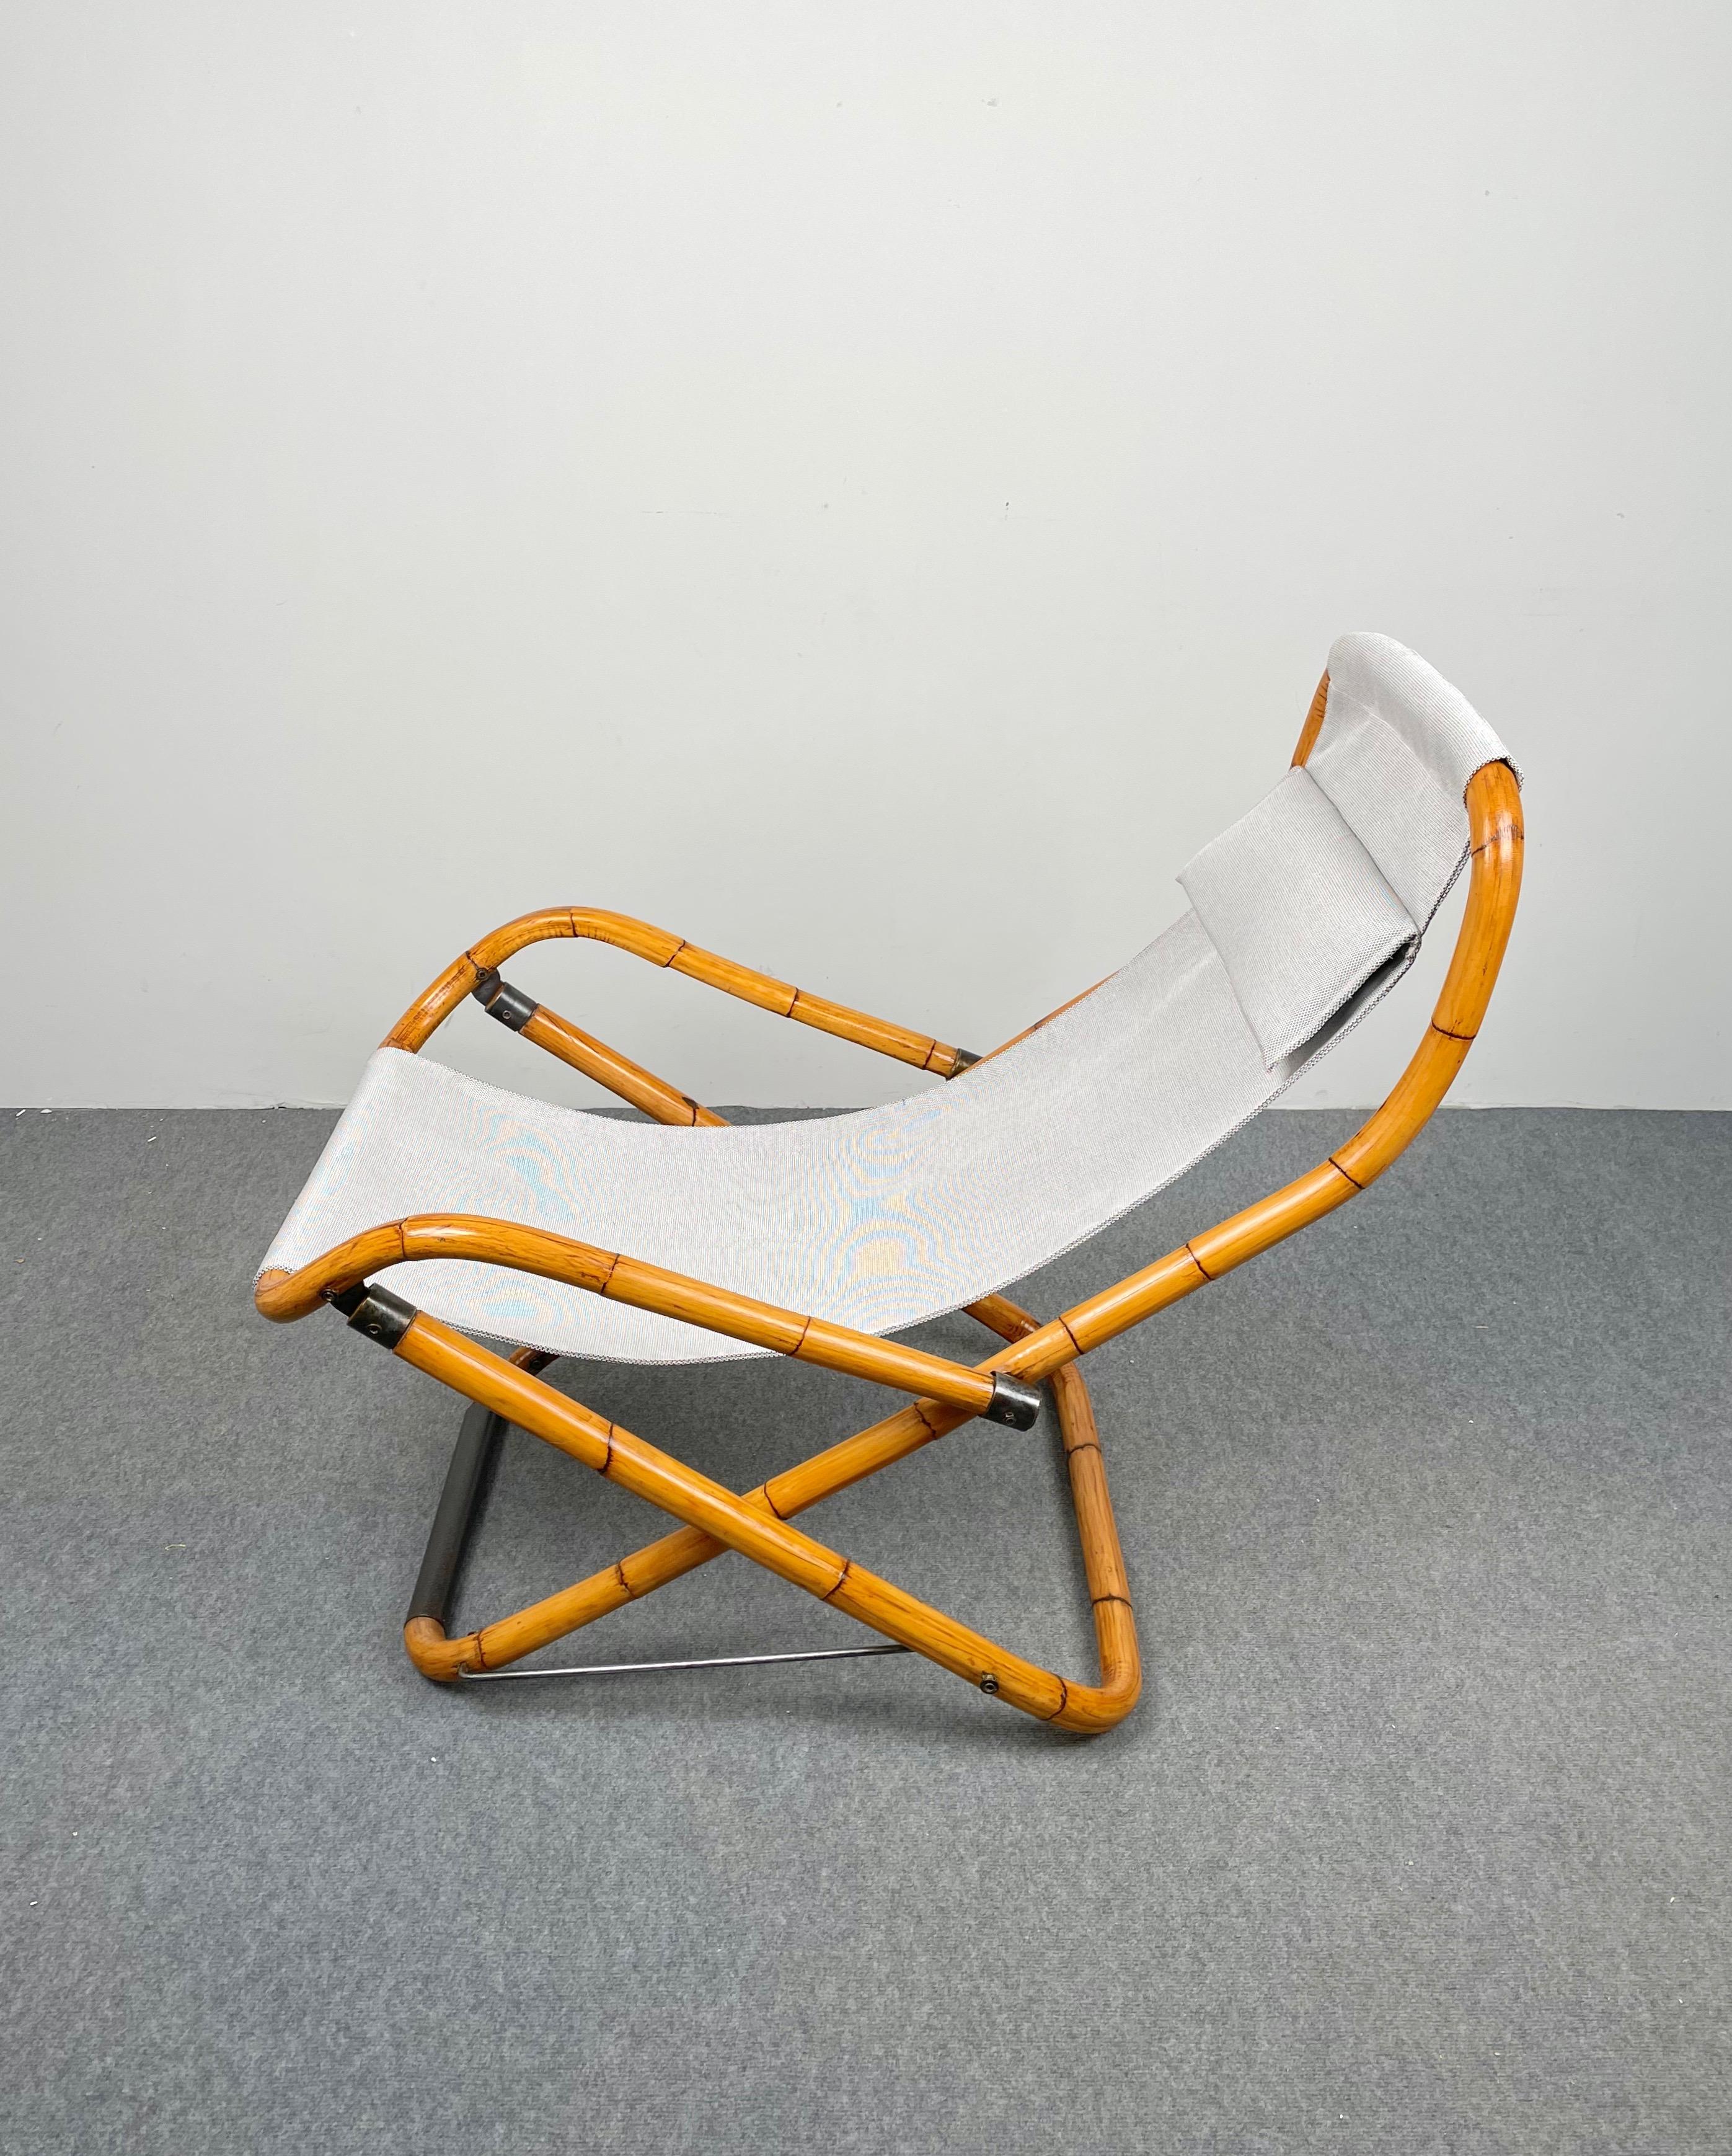 Pair of Bamboo, Iron and Fabric Folding Lounge Deck Chair, Italy, 1960s For Sale 1